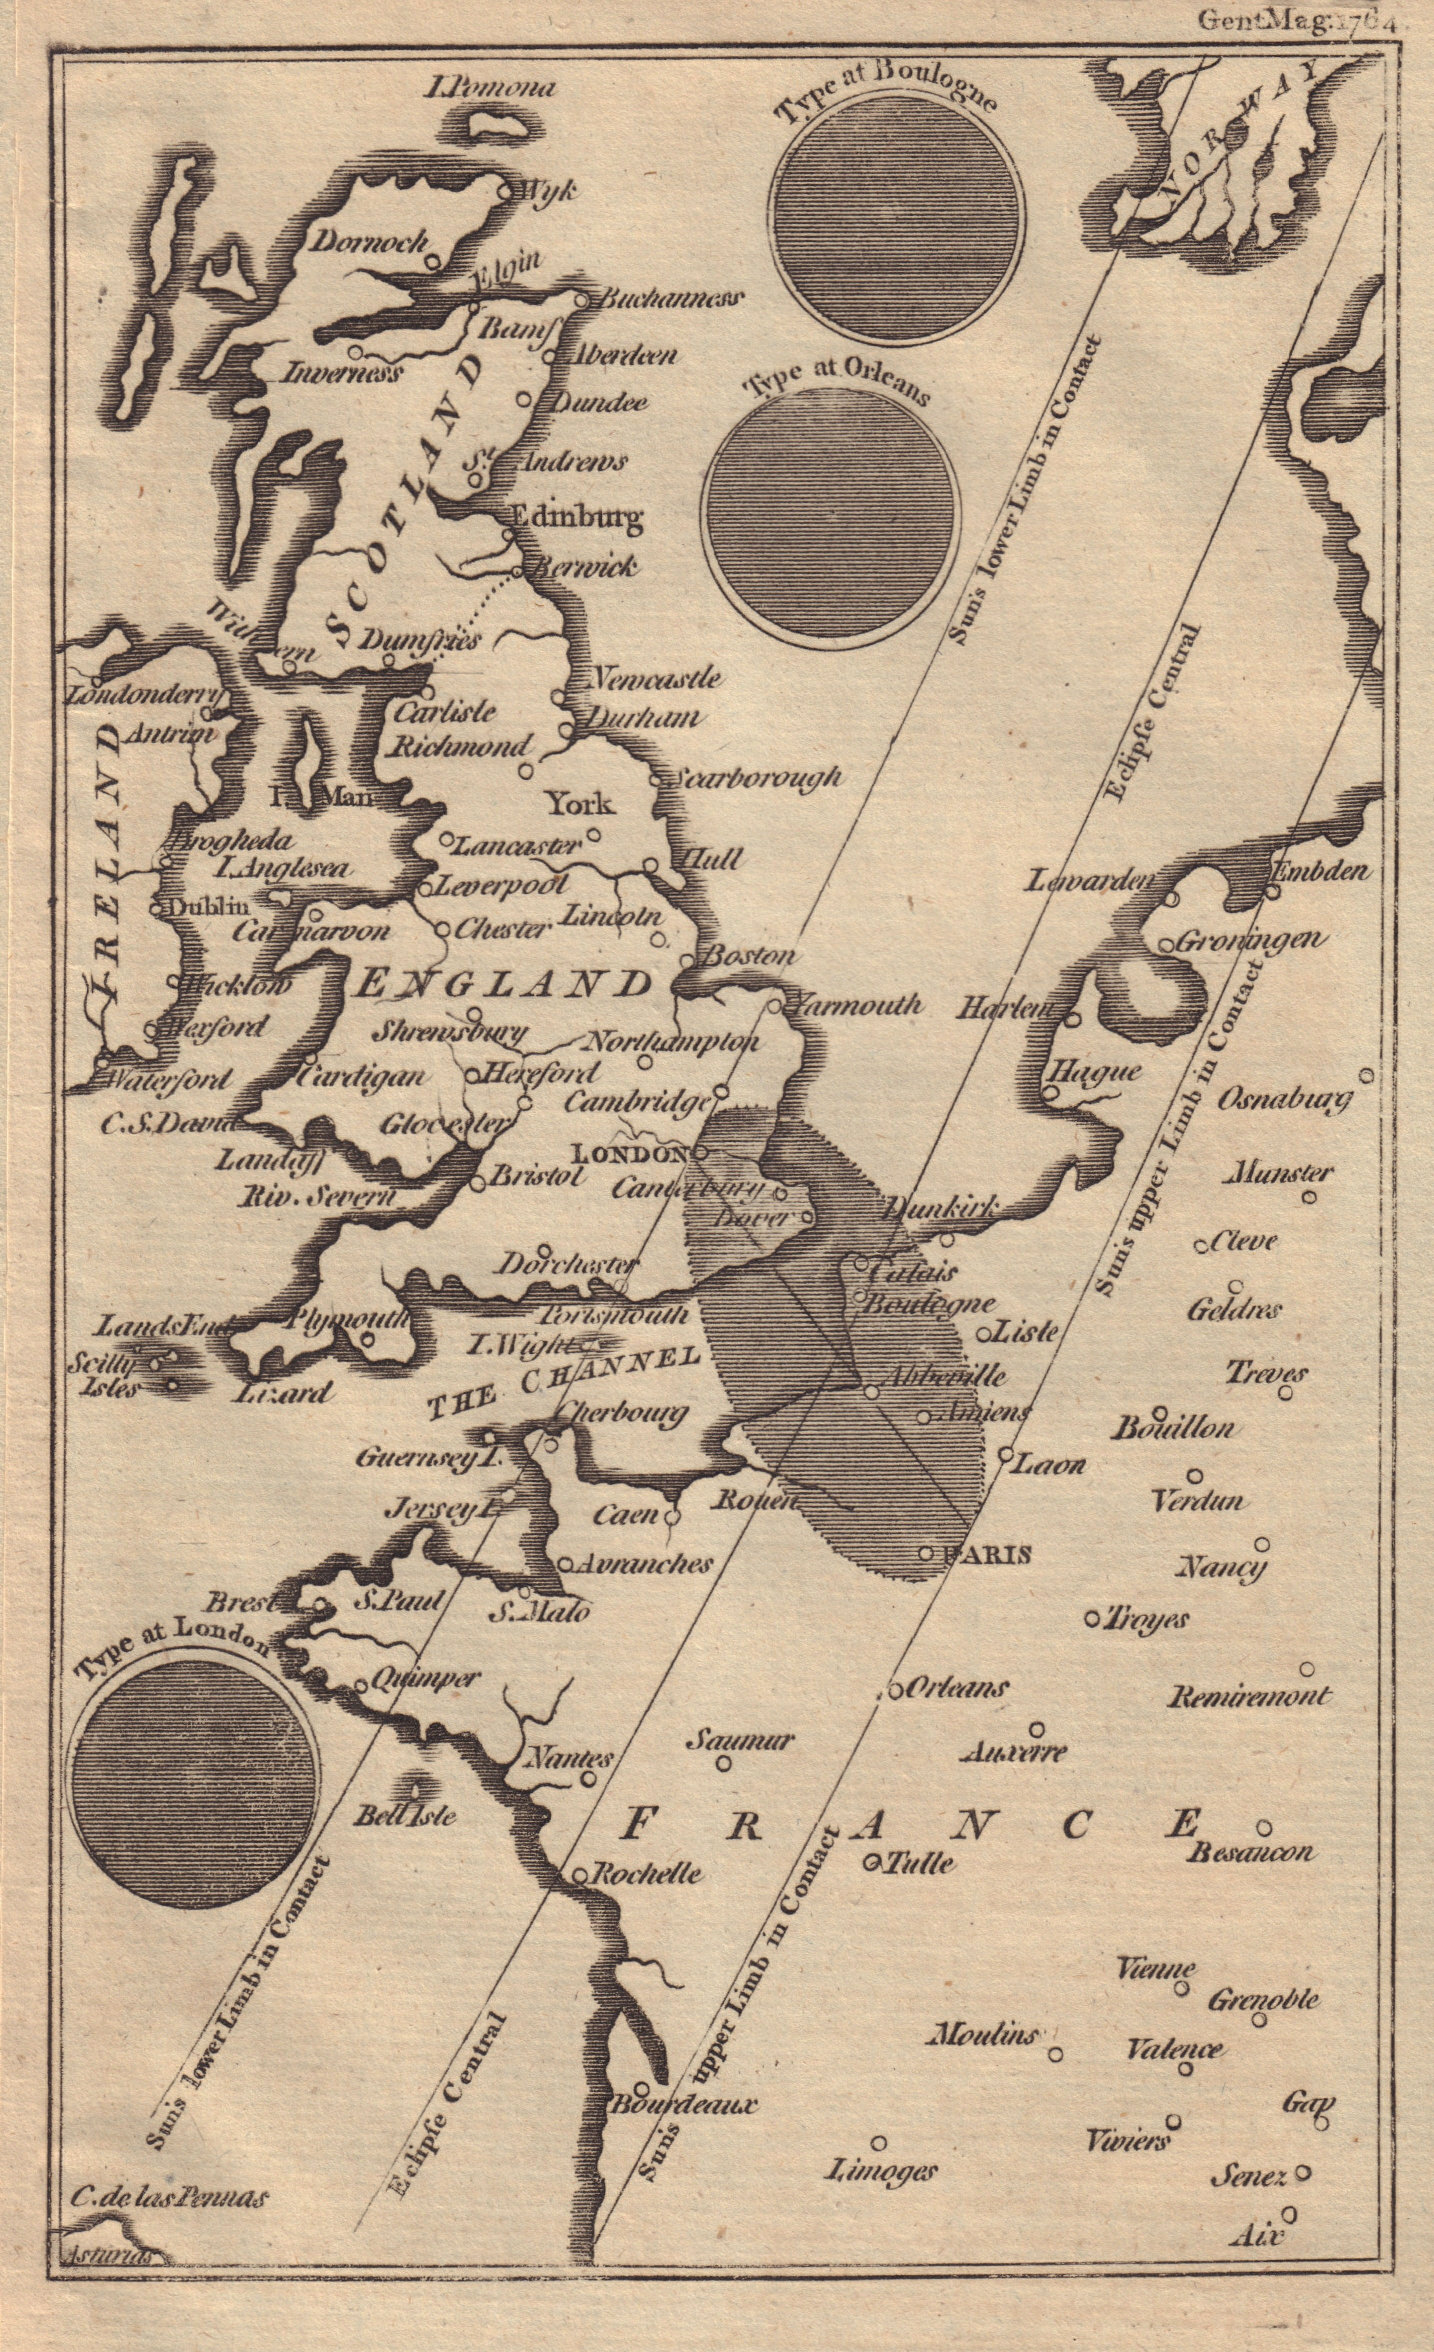 The Solar eclipse of 1 April 1764 across England & France. GENTS MAG 1764 map